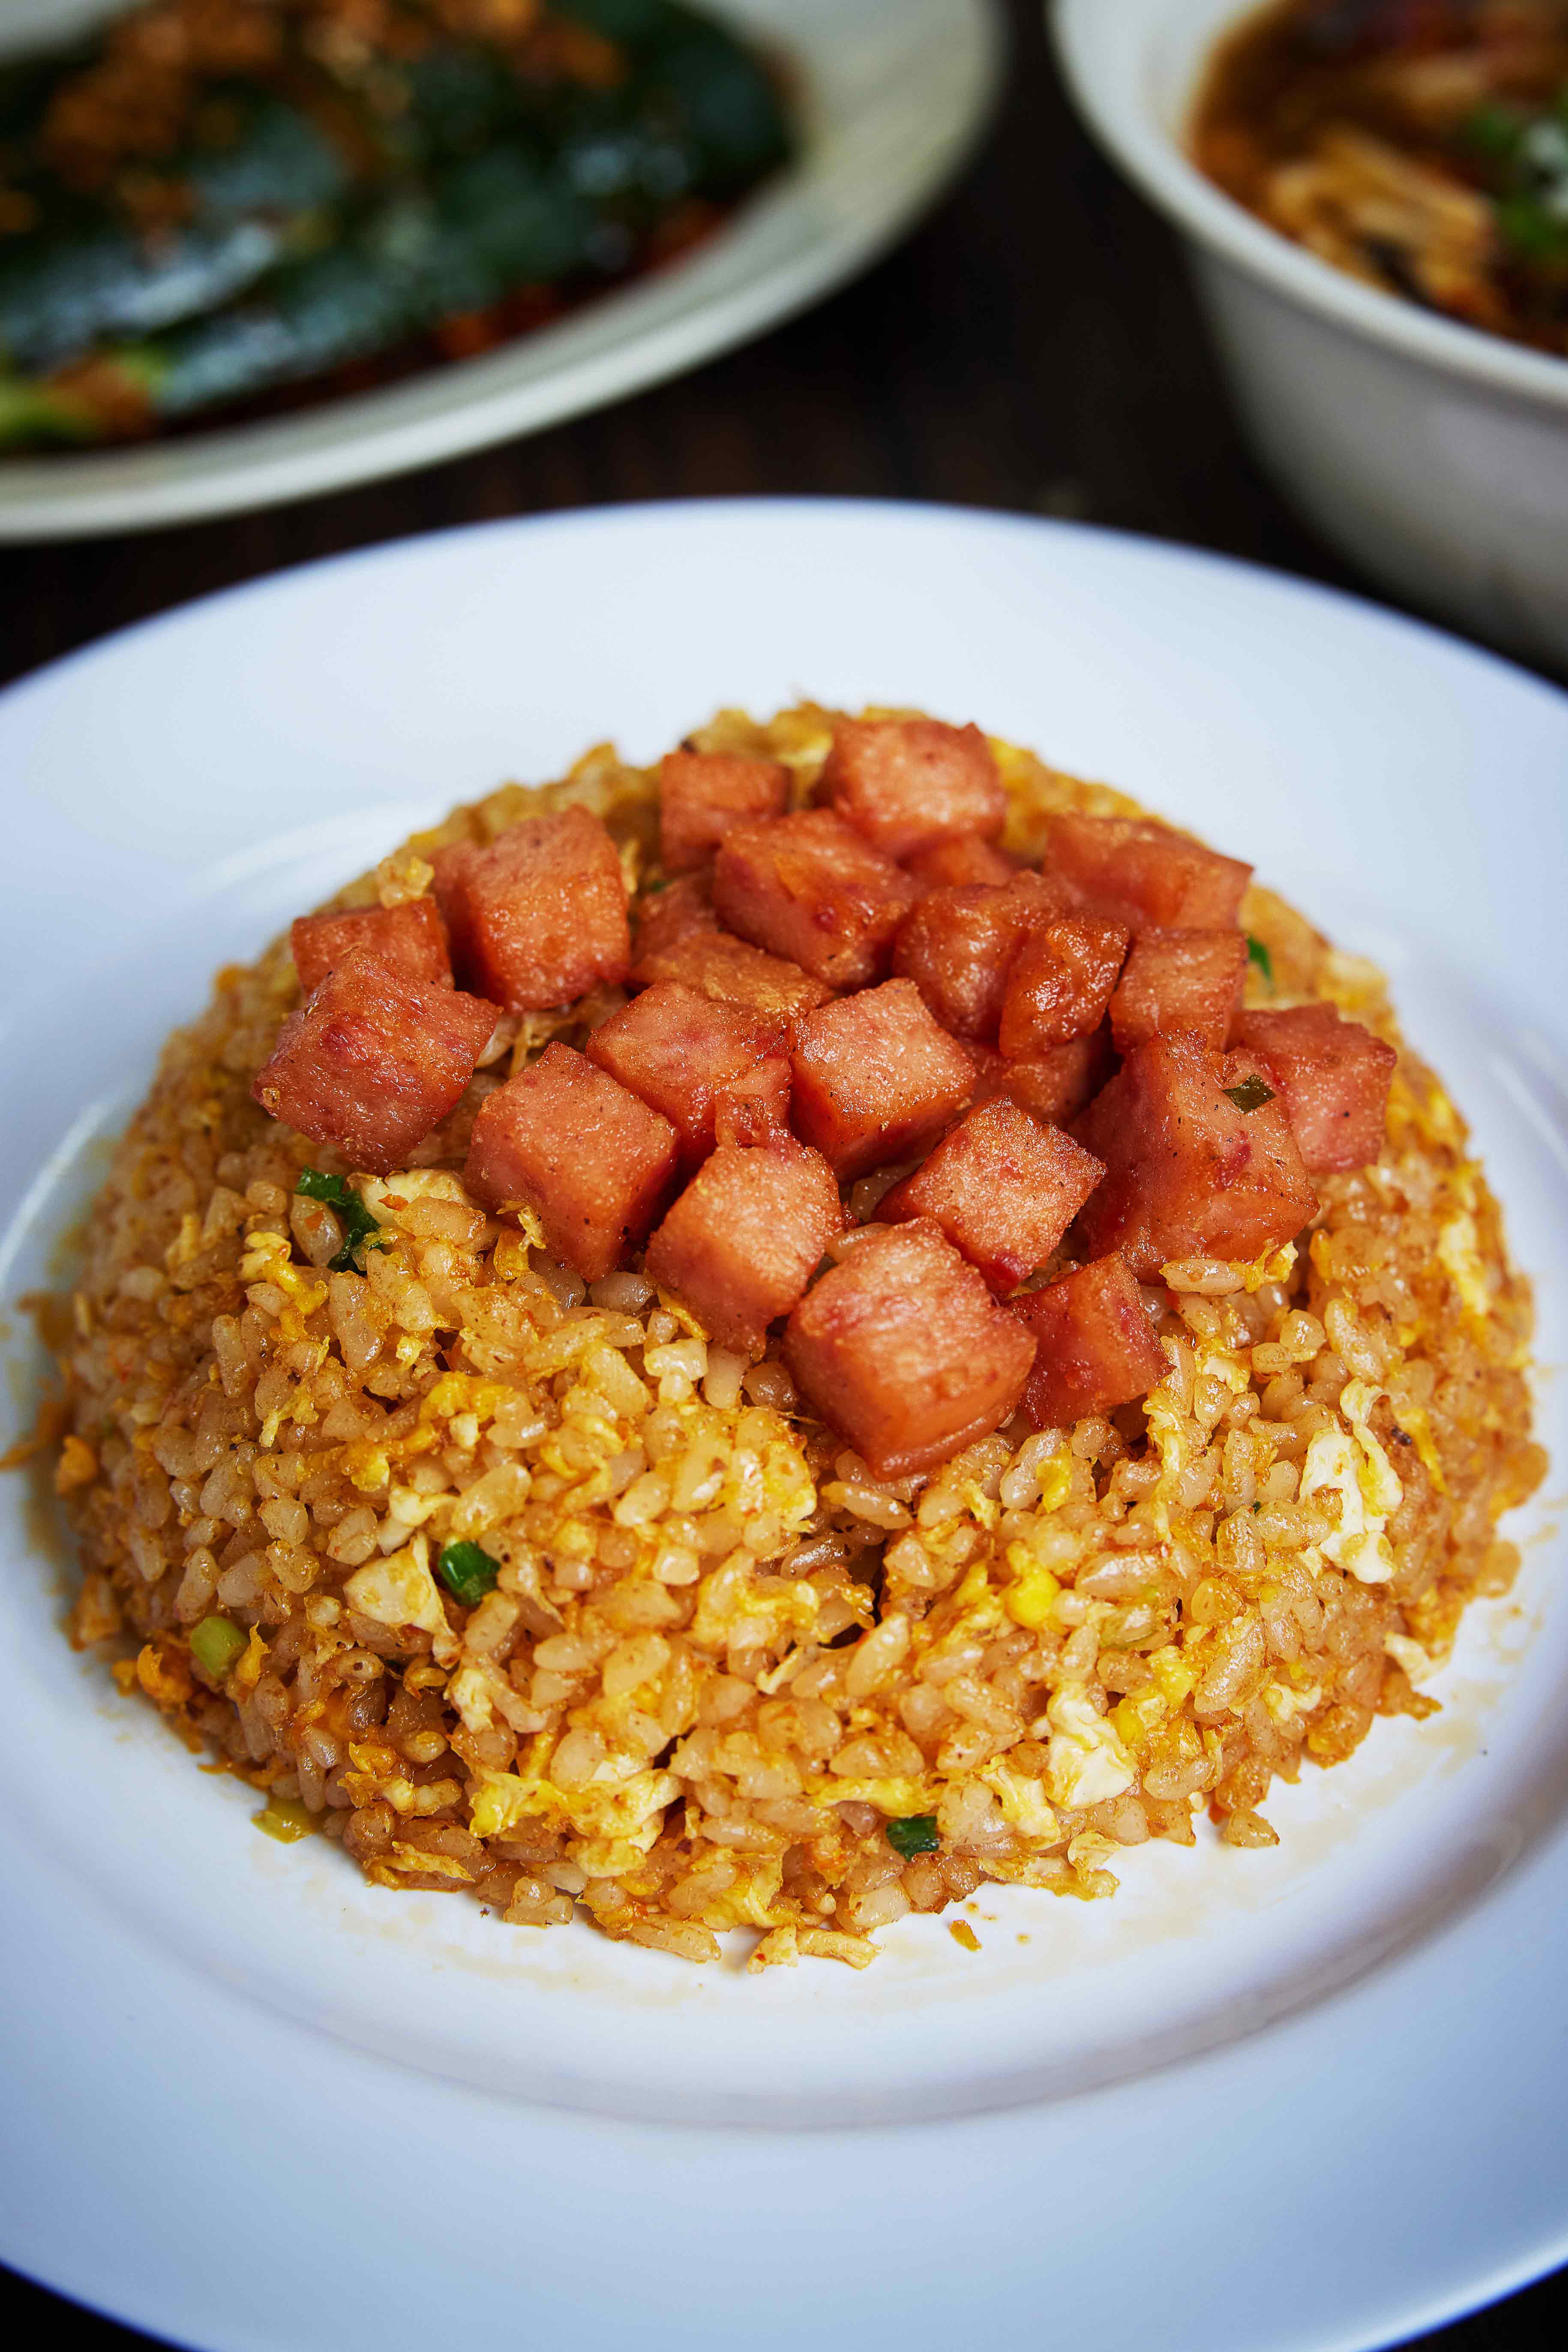 The Sambal Fried Rice, from $4.50 (8 DAYS Pick!)